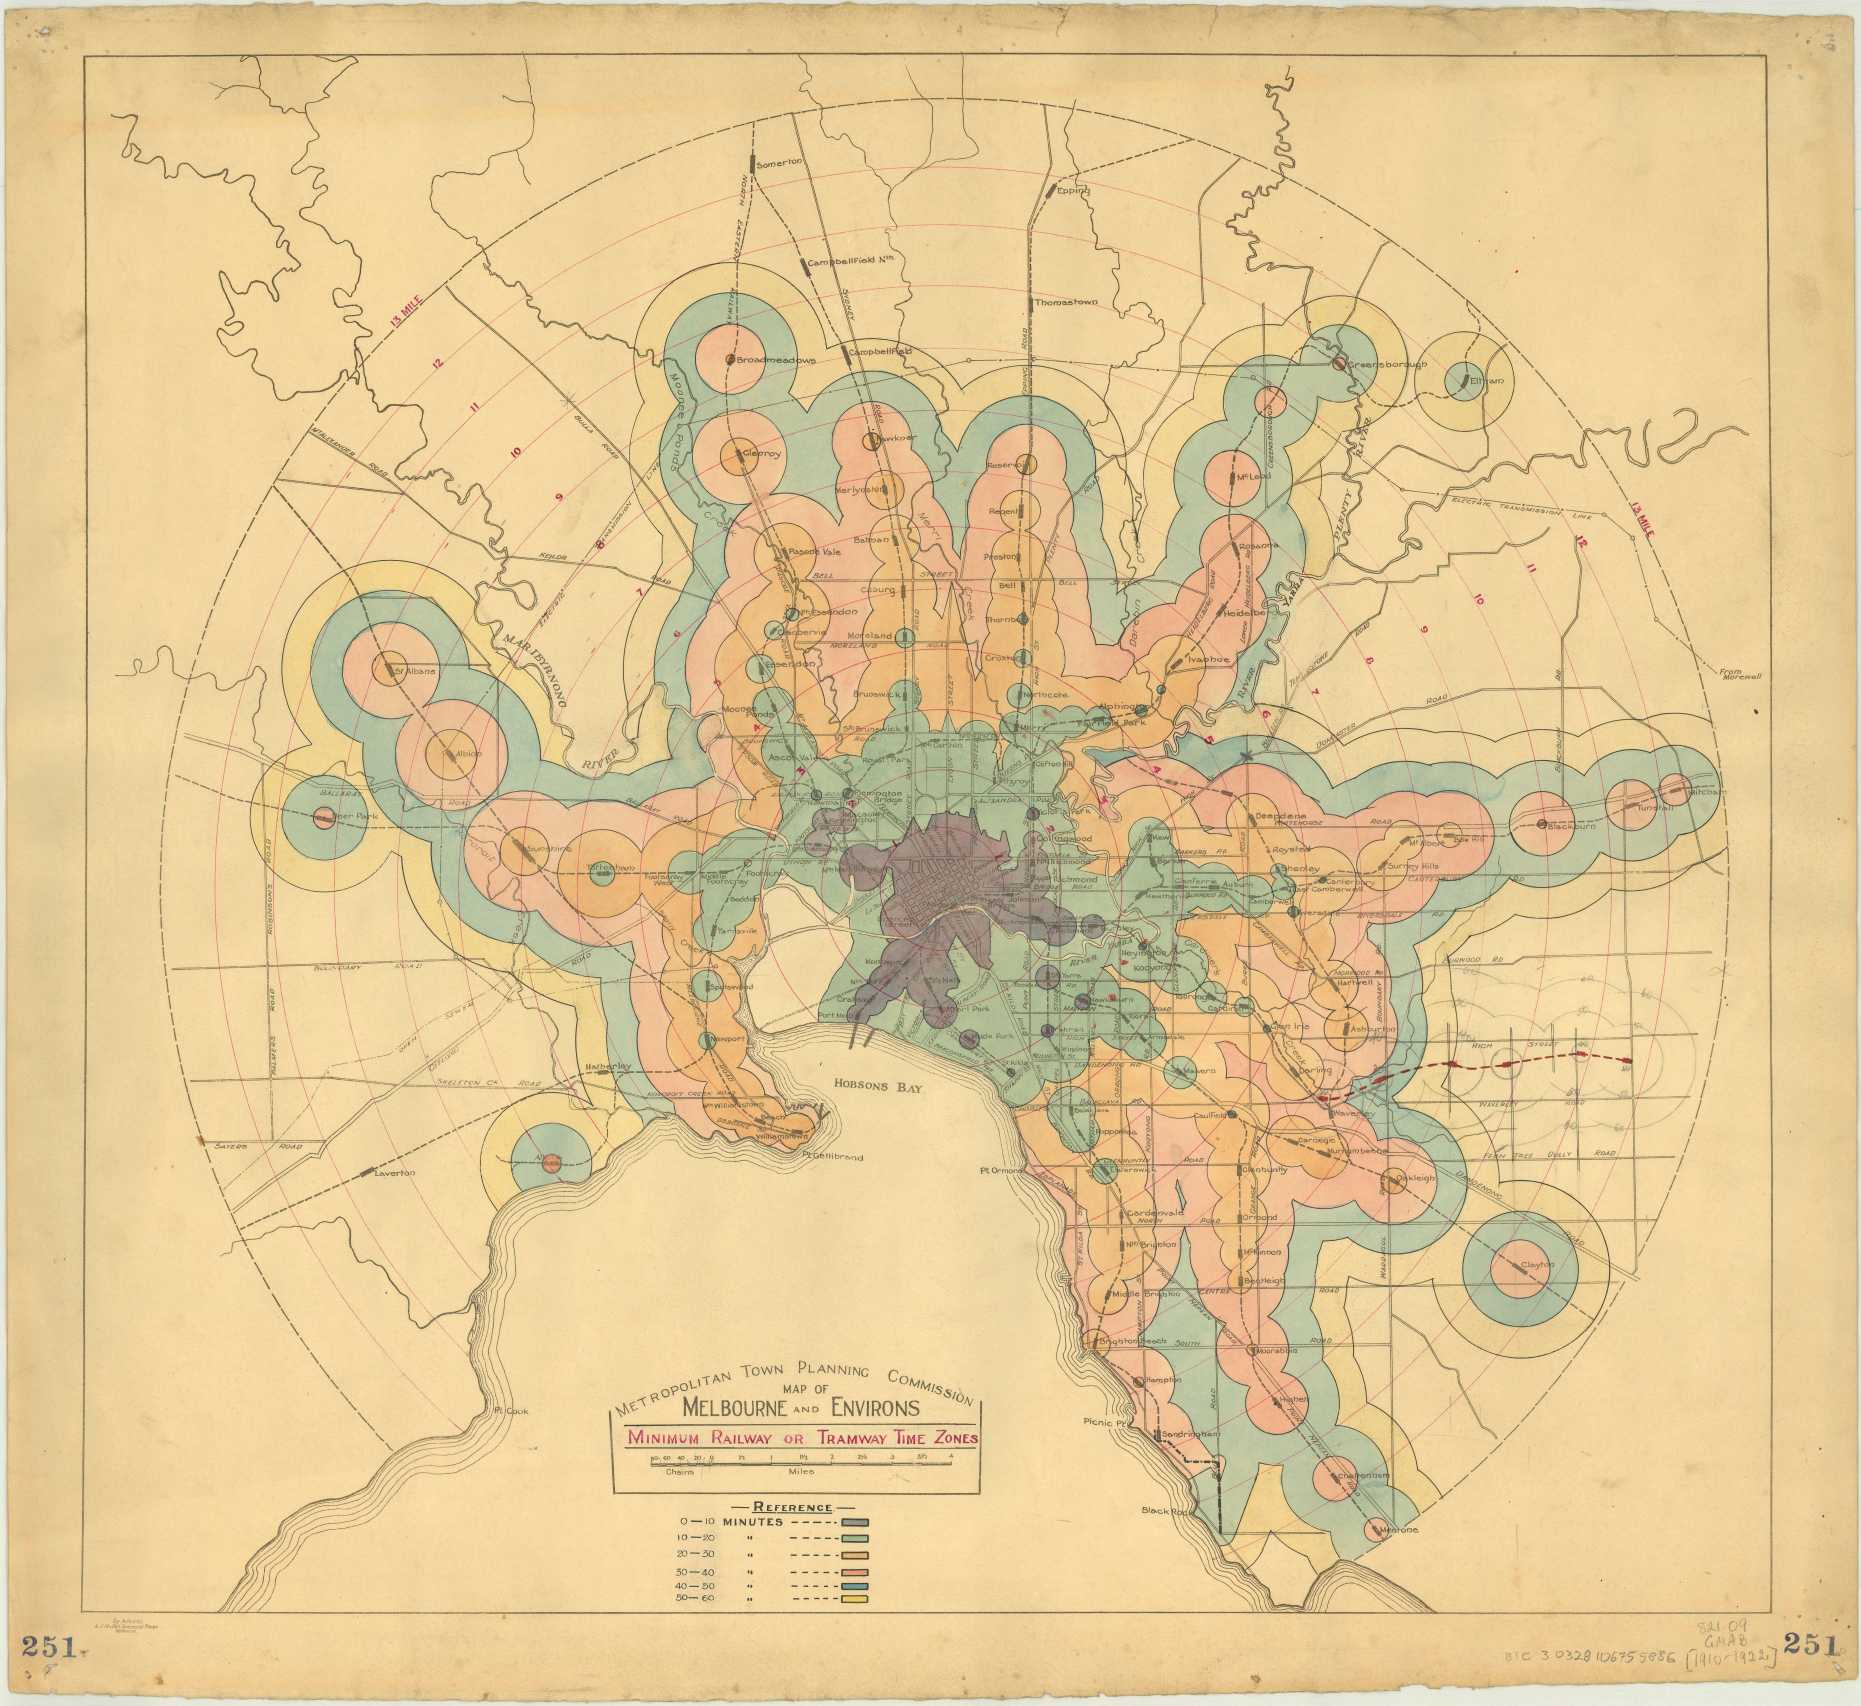 Enlarged view: Isochrone map of Melbourne travel times to the city centre by tram or train between 1910 and 1922 (CC0 1.0 by the Melbourne and Metropolitan Tramways Board via Wikimedia Commons)